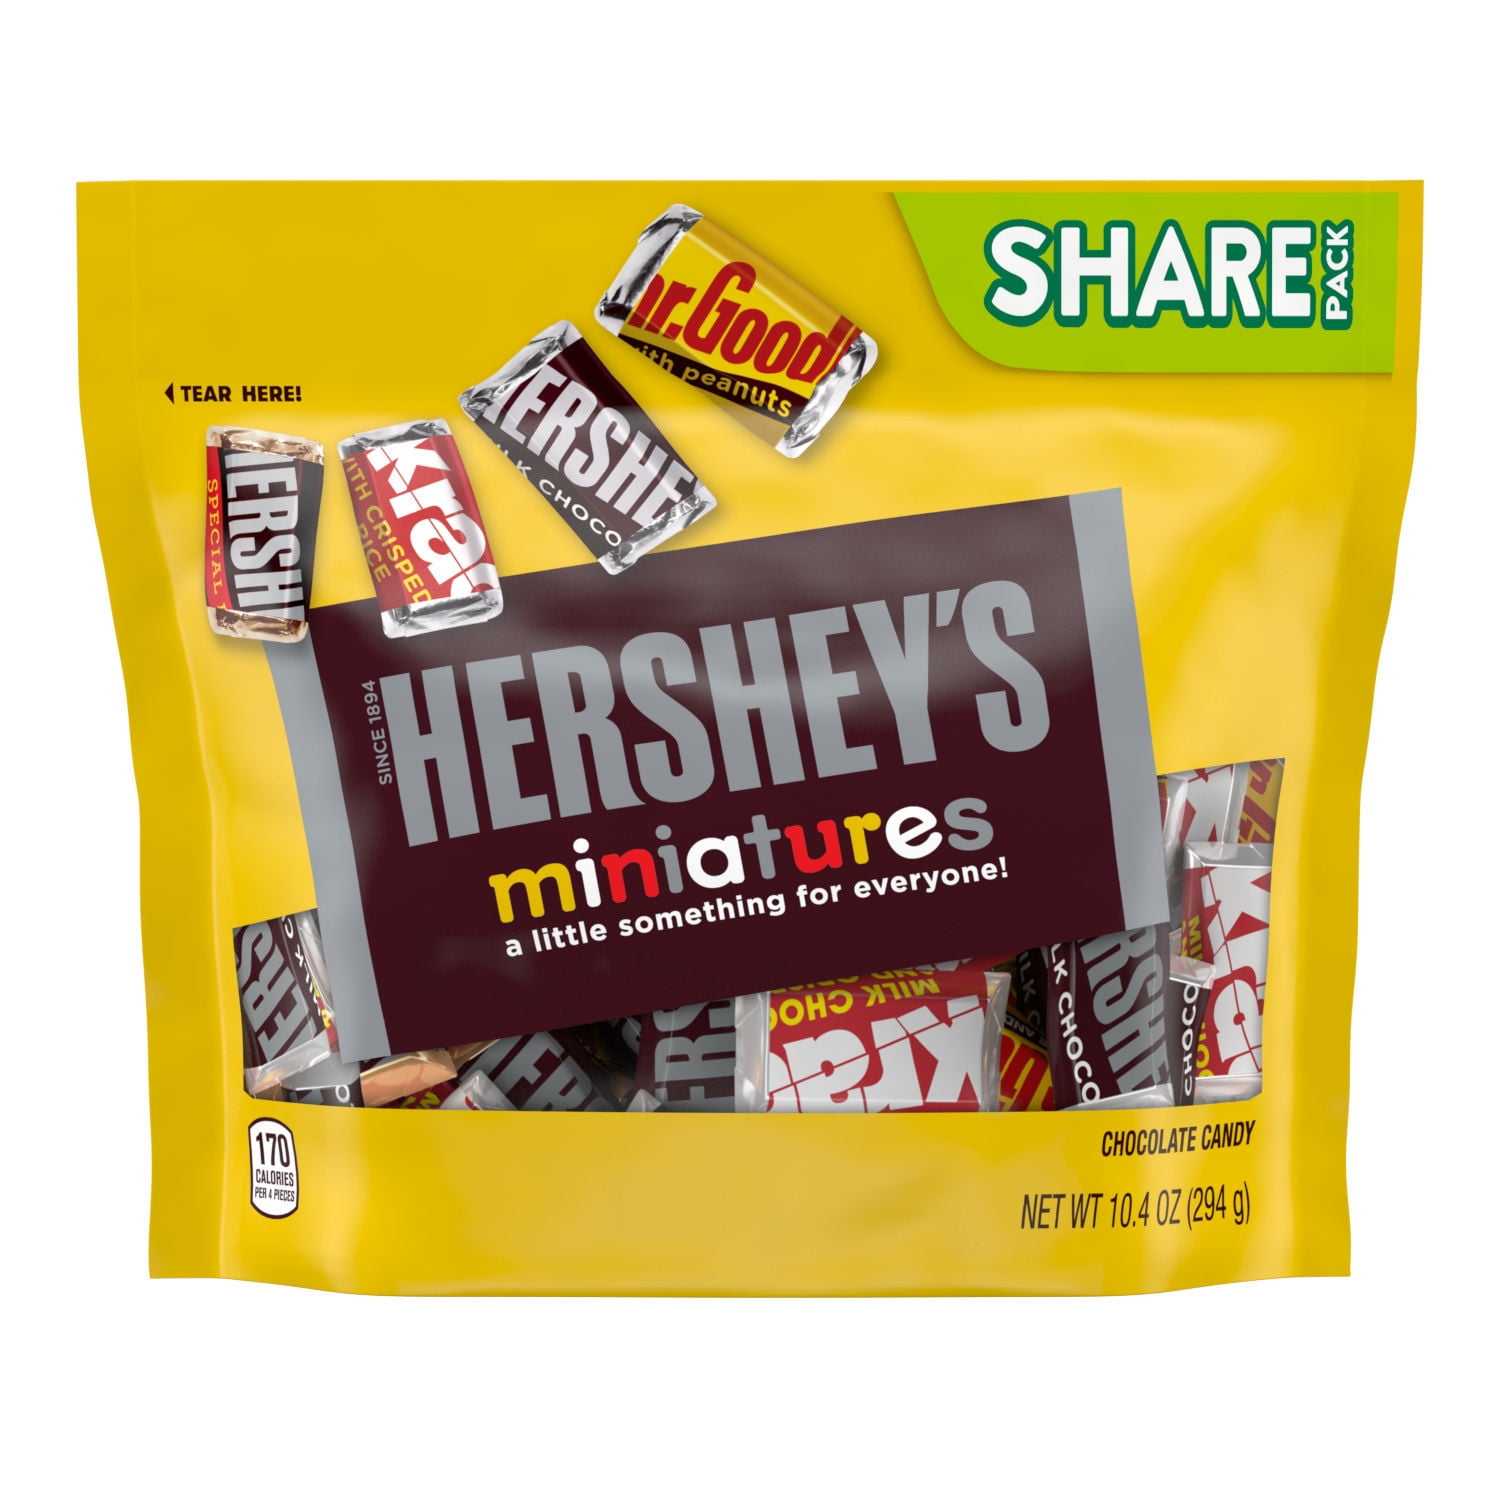 HERSHEY'S Miniatures Assorted Milk and Dark Chocolate Snack Size, Easter Candy Bars Share Pack, 10.4 oz